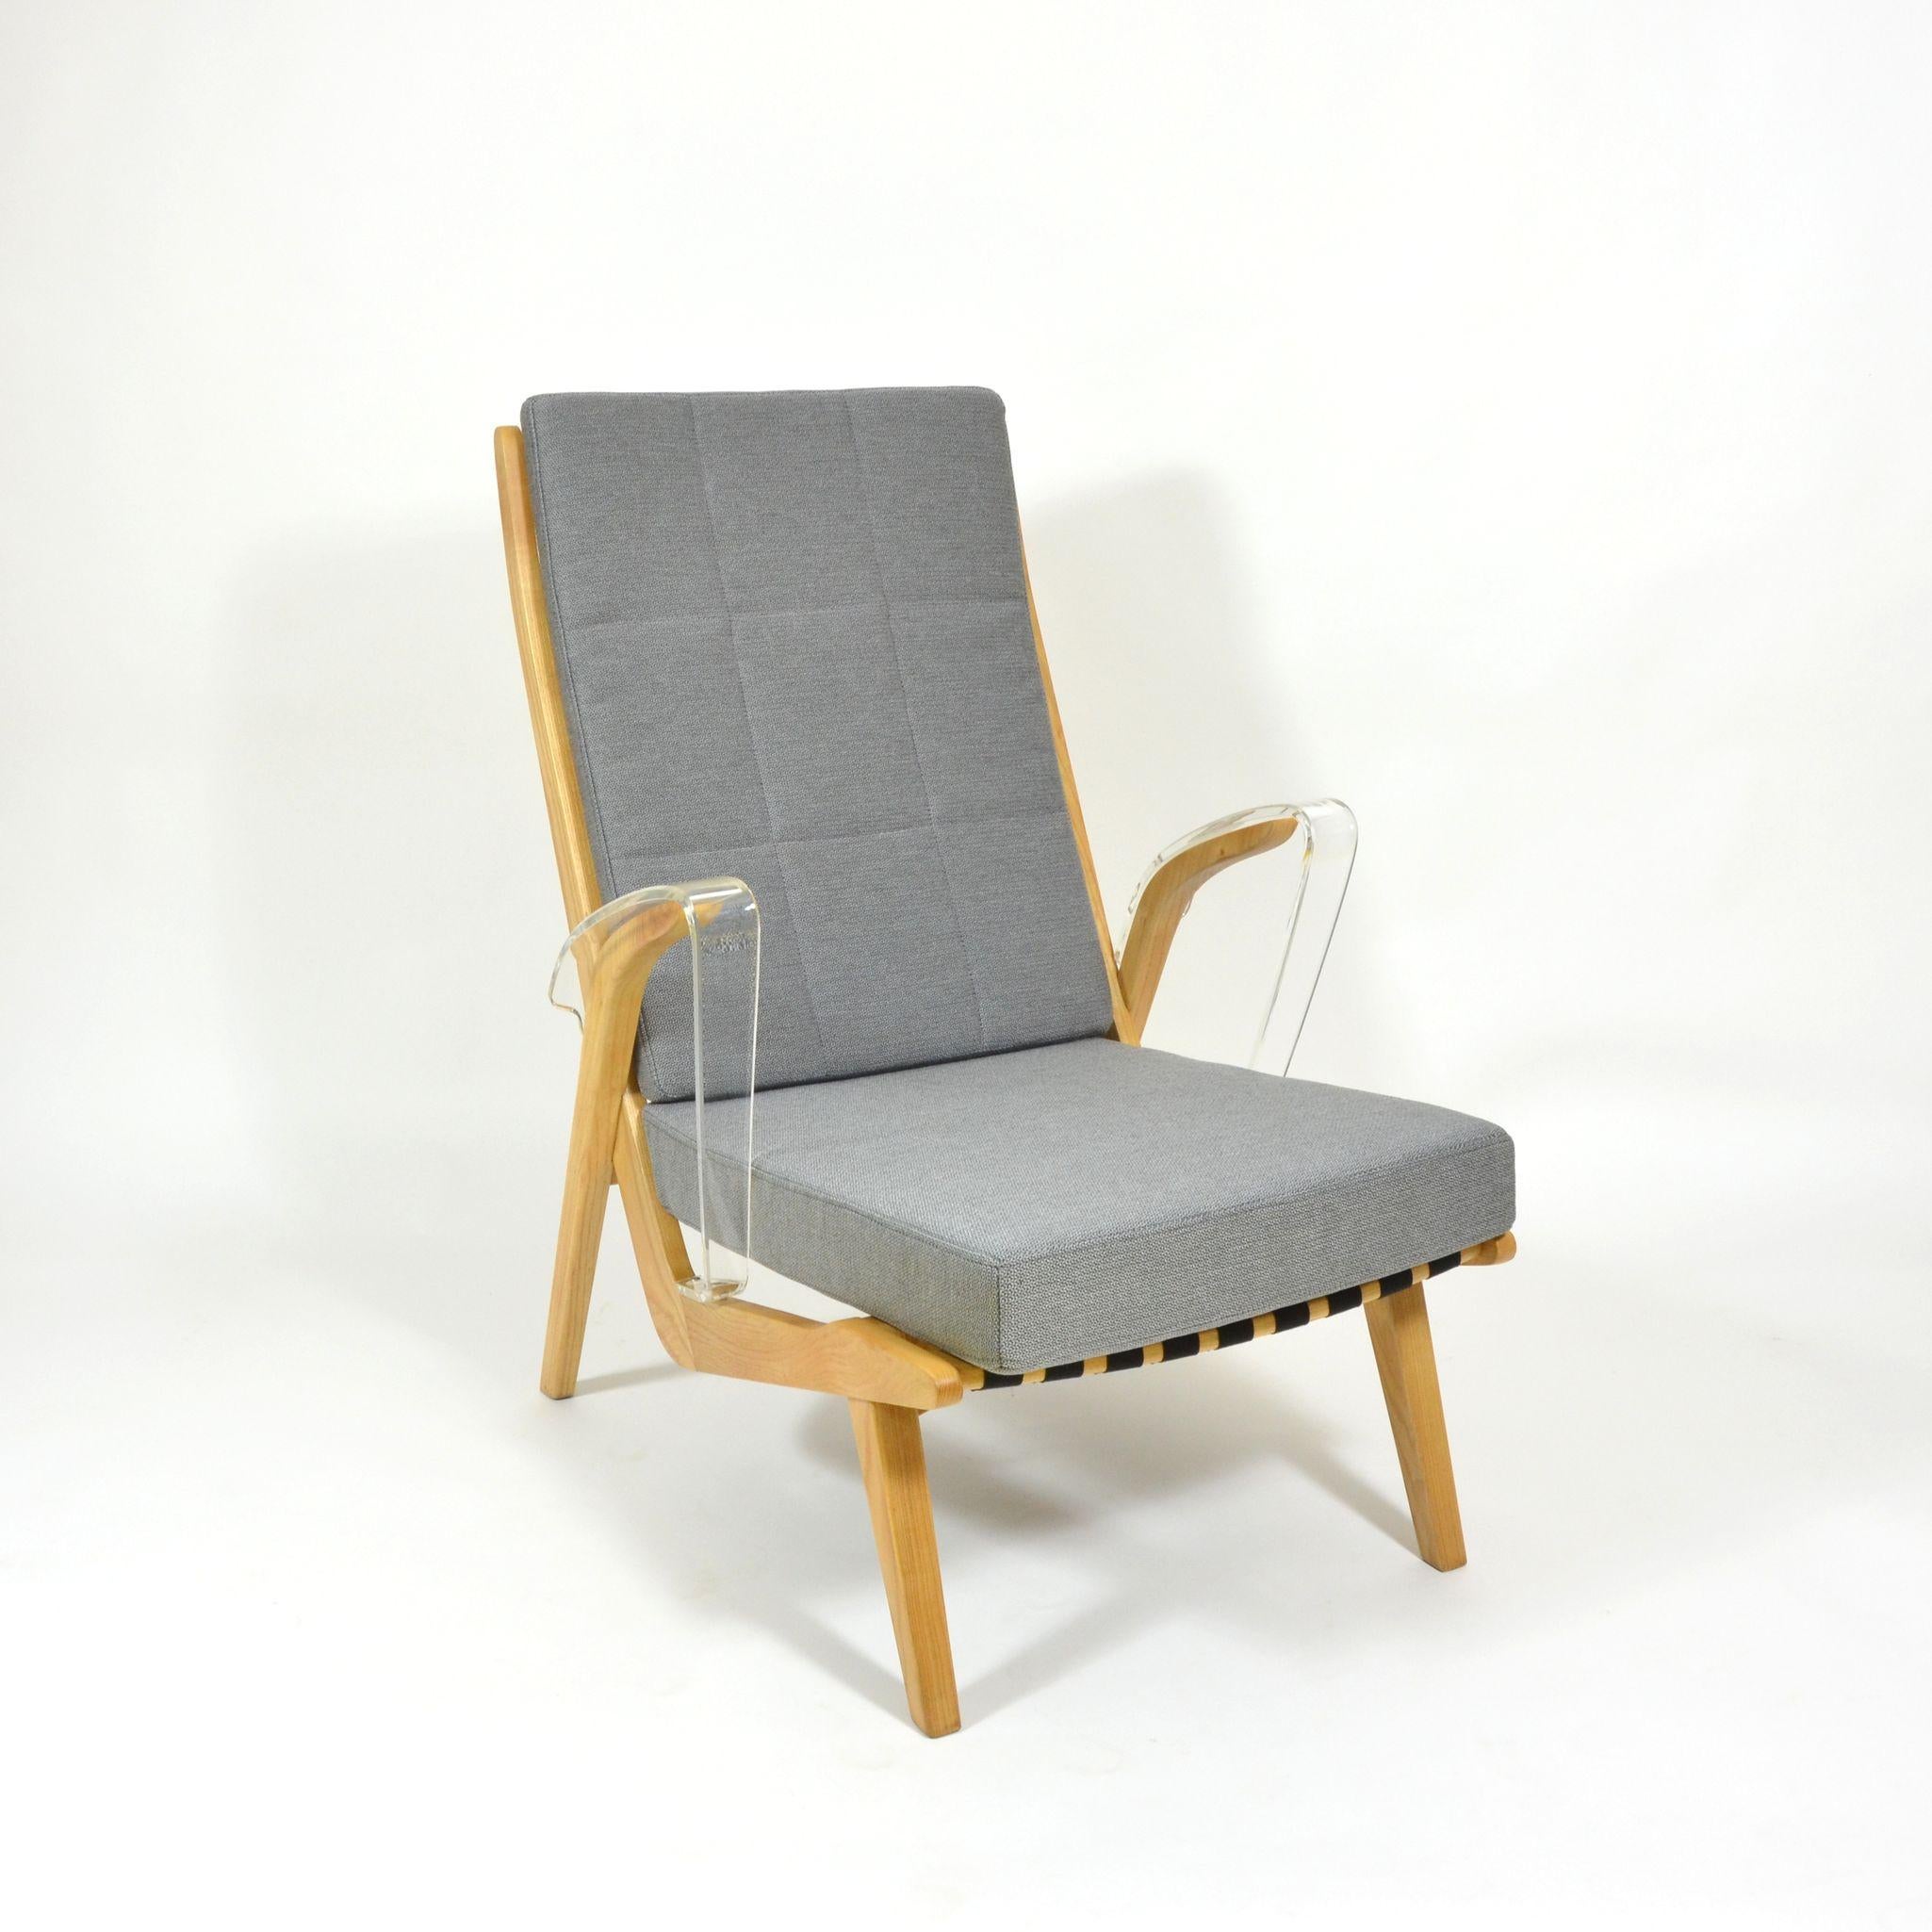 Rare model of armchair with removable upholstery pillows. Armchair has wooden construction from beech wood. Seat is made from black strap and new upholstery is covered by grey upholstery fabric with precise details. The most unique part are armrests